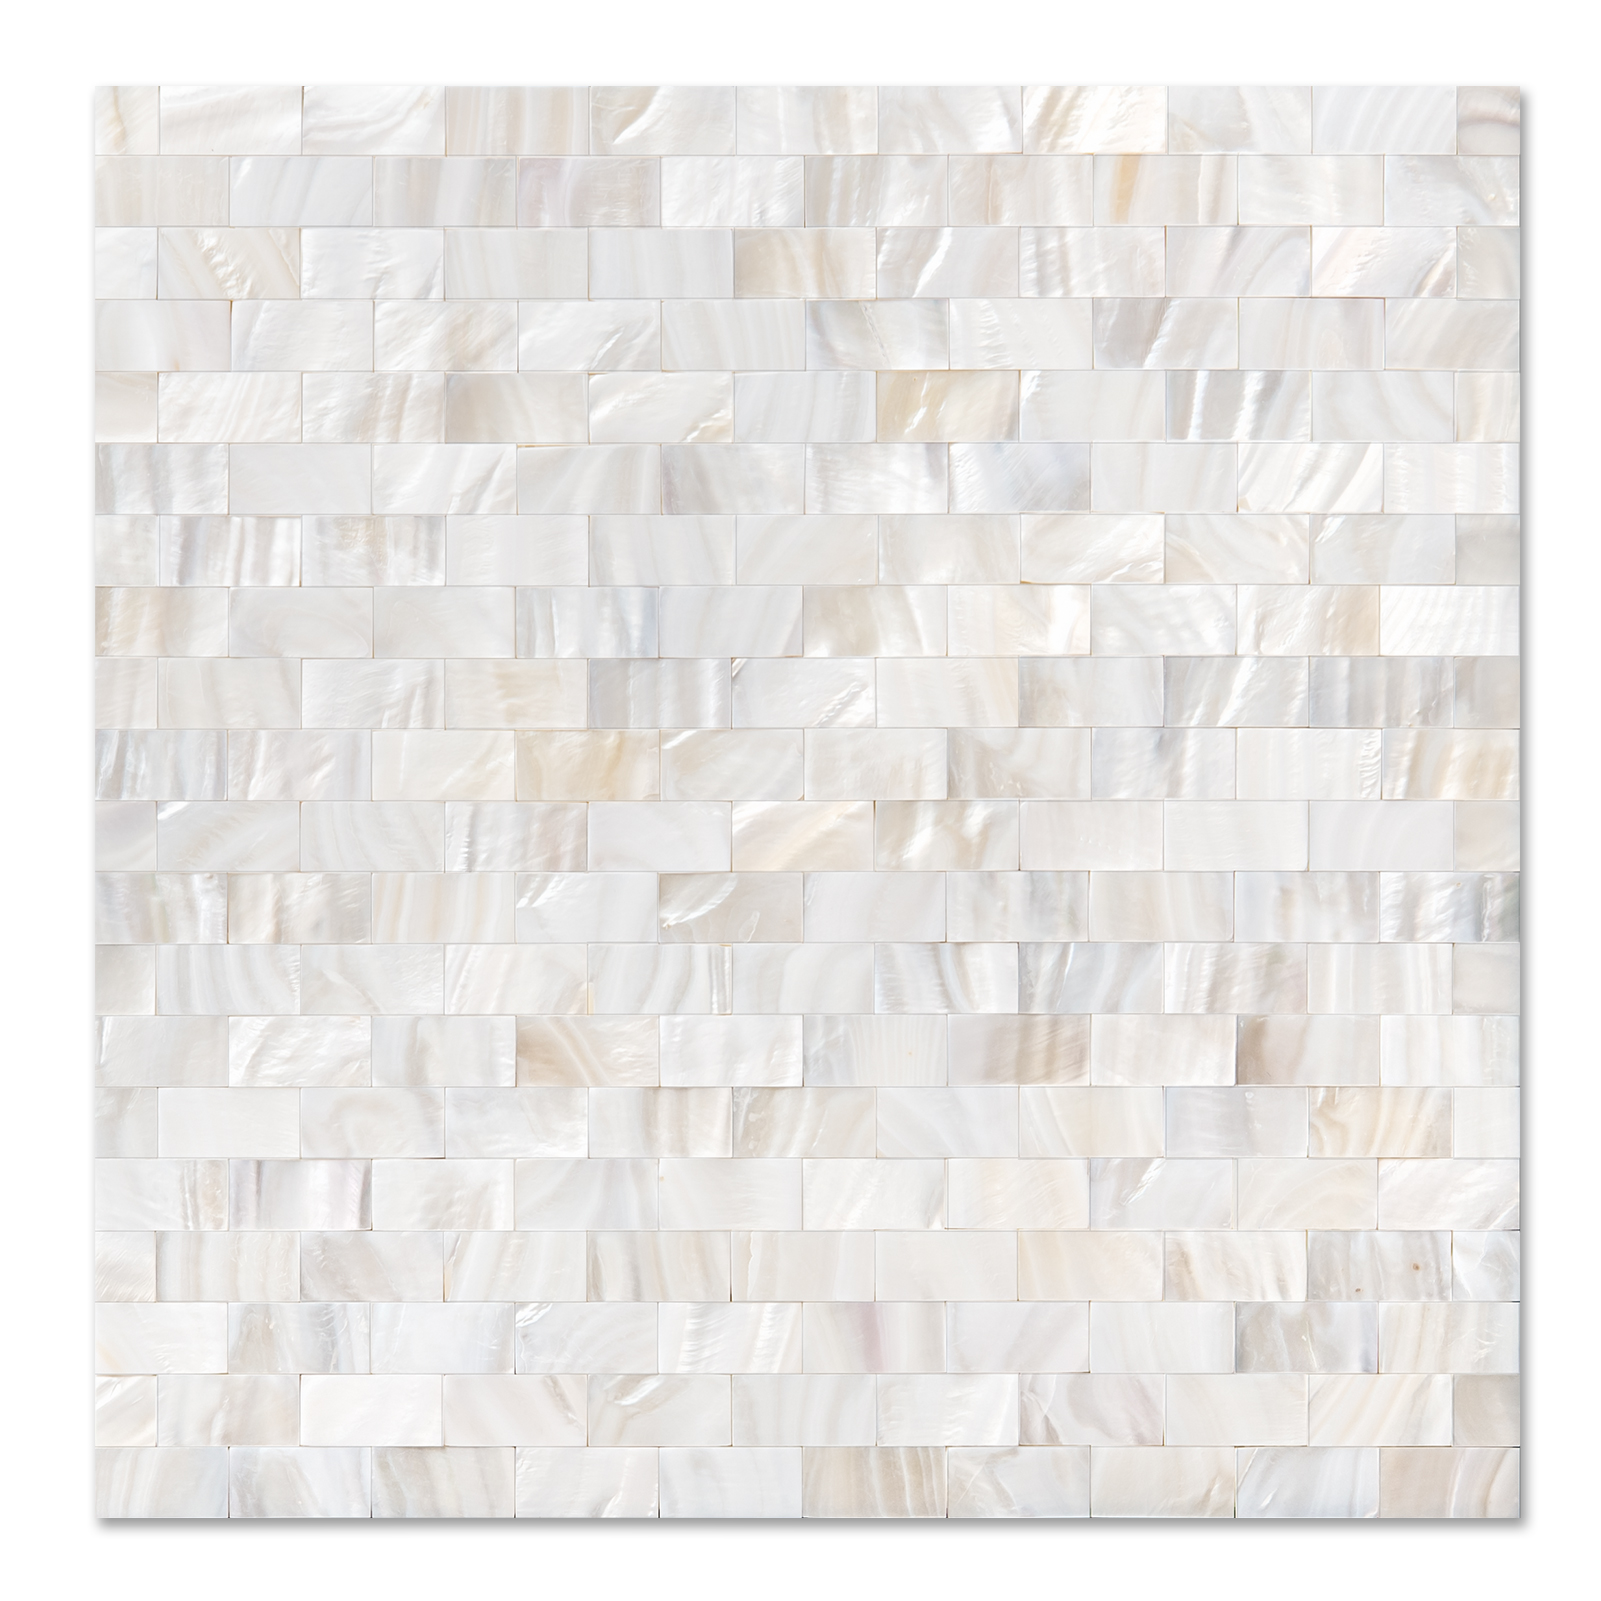 A18602-1-Pack Peel and Stick Mother of Pearl Shell Tile for Kitchen Backsplashes, 12